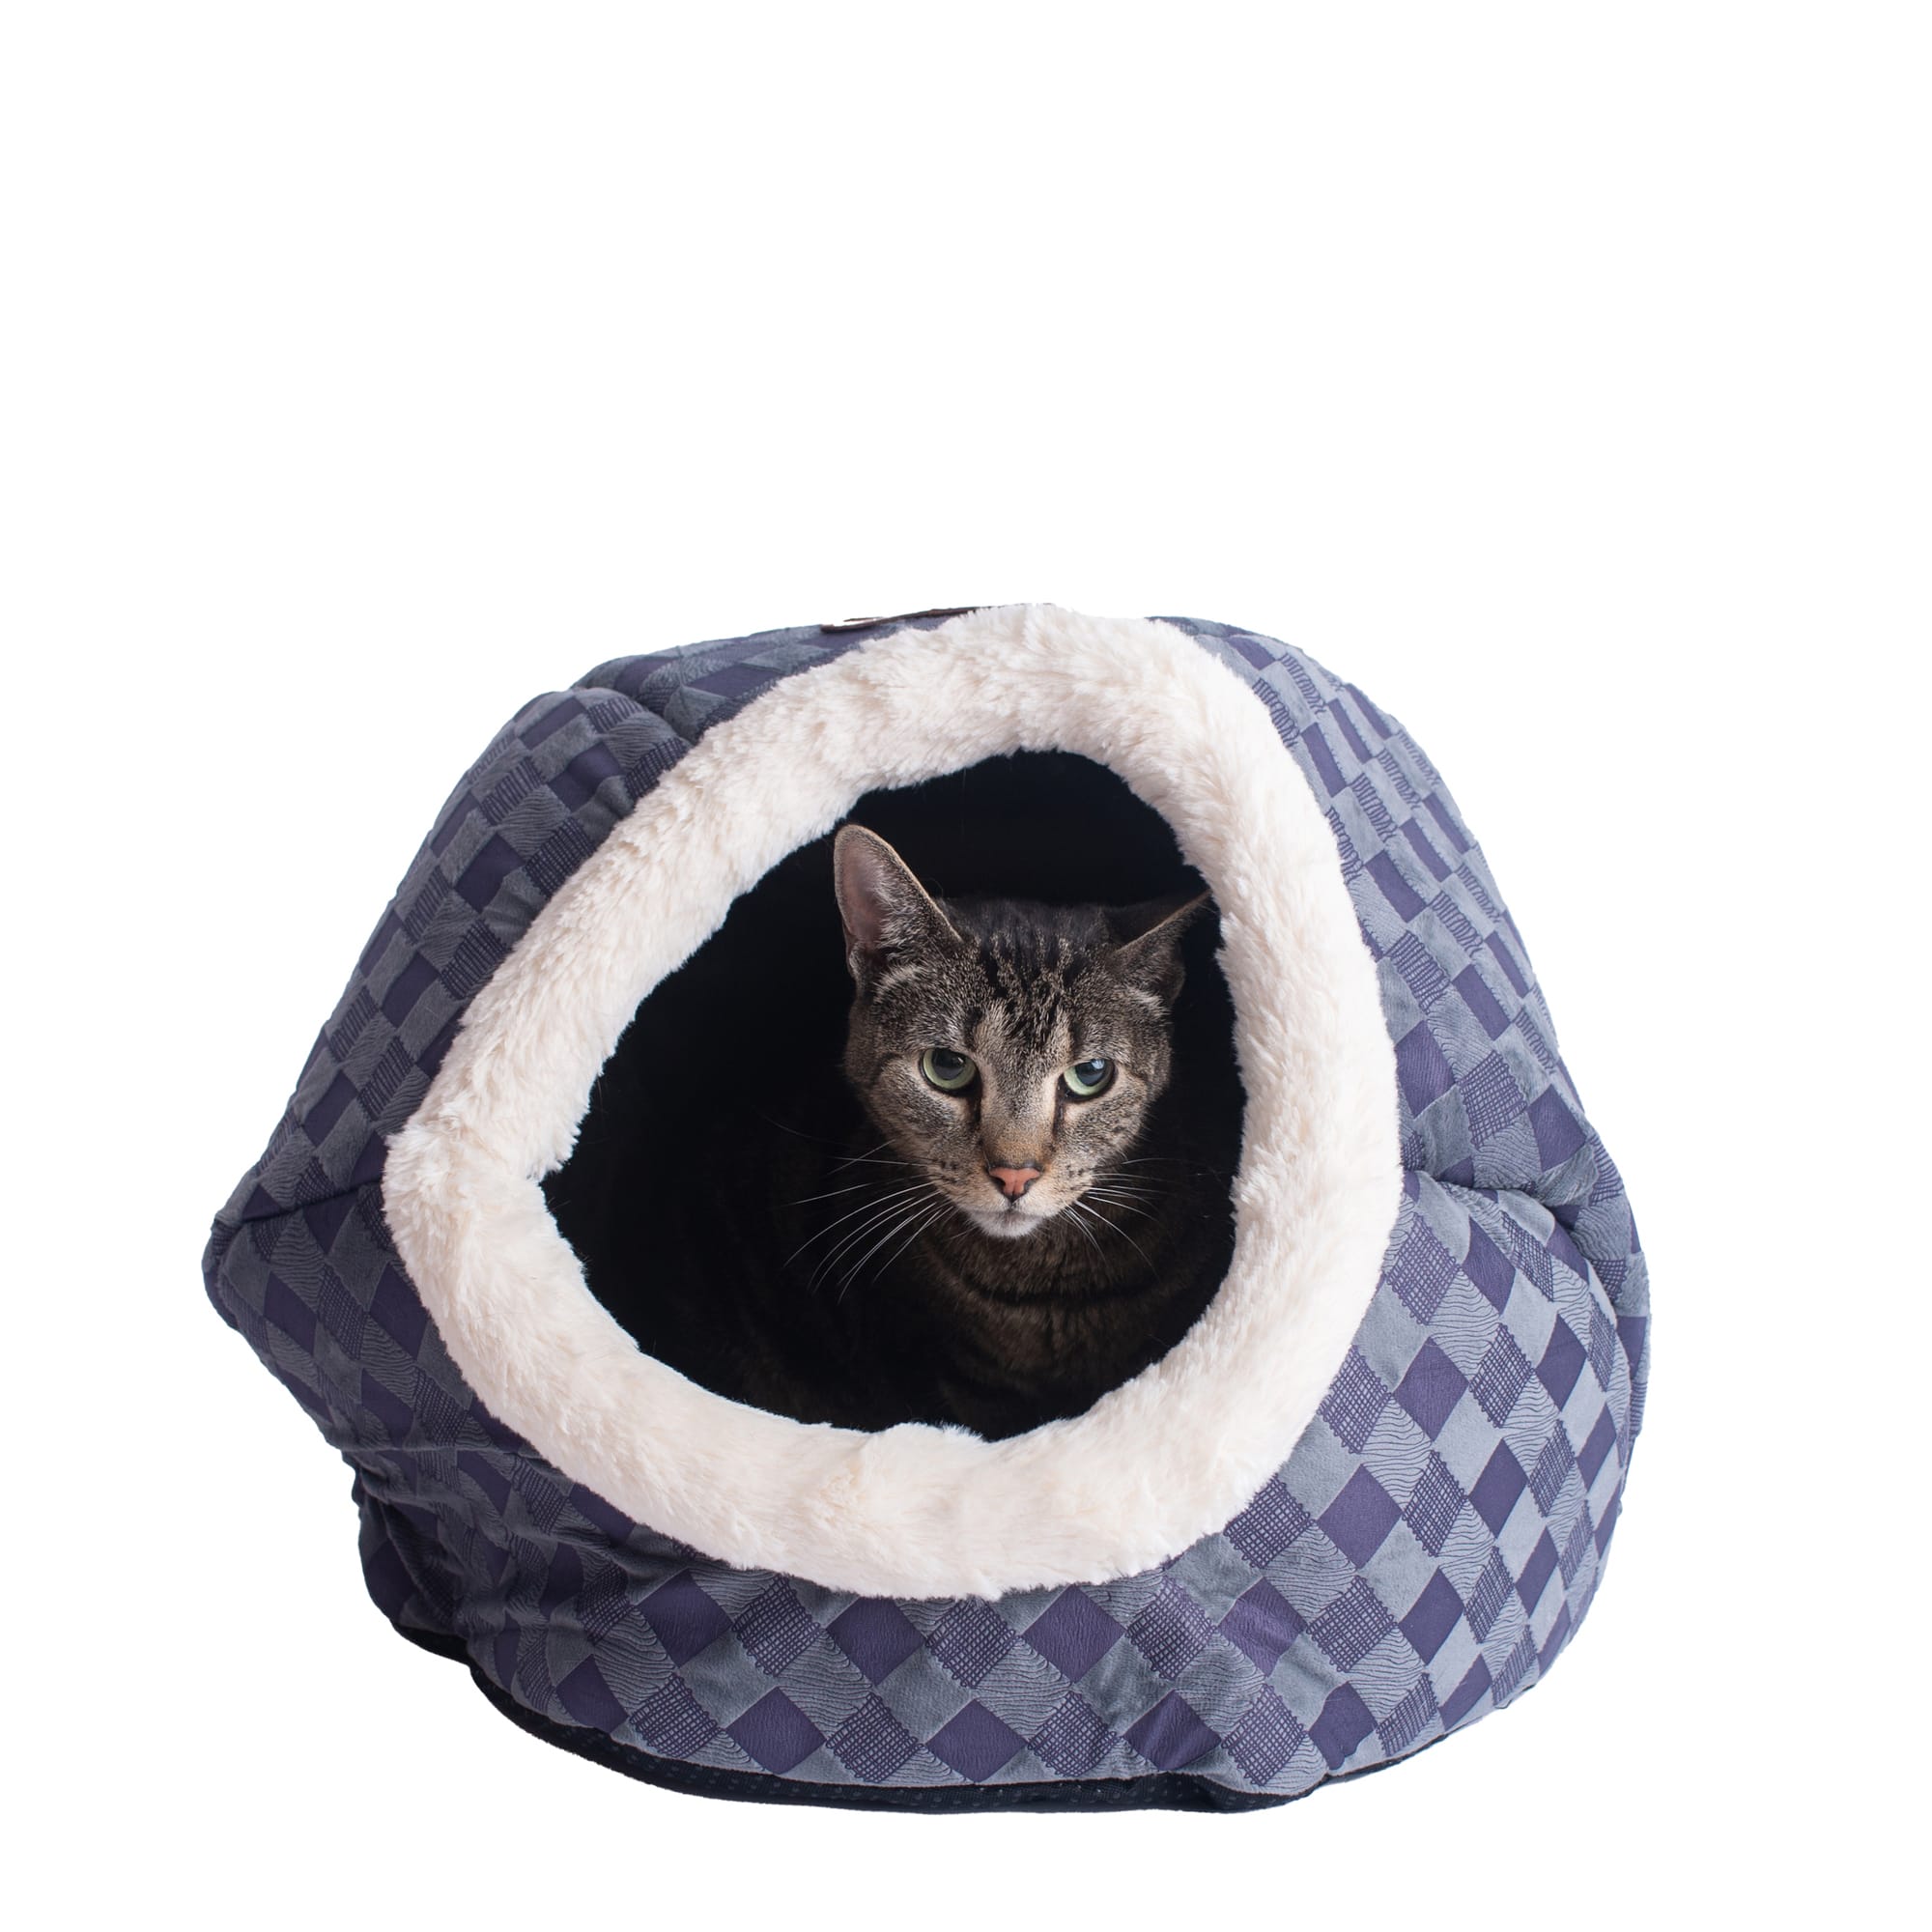 Photos - Cat Bed / House Armarkat Blue Checkered Model C44 Cat Bed, 19" L X 16" W X 12" H, 